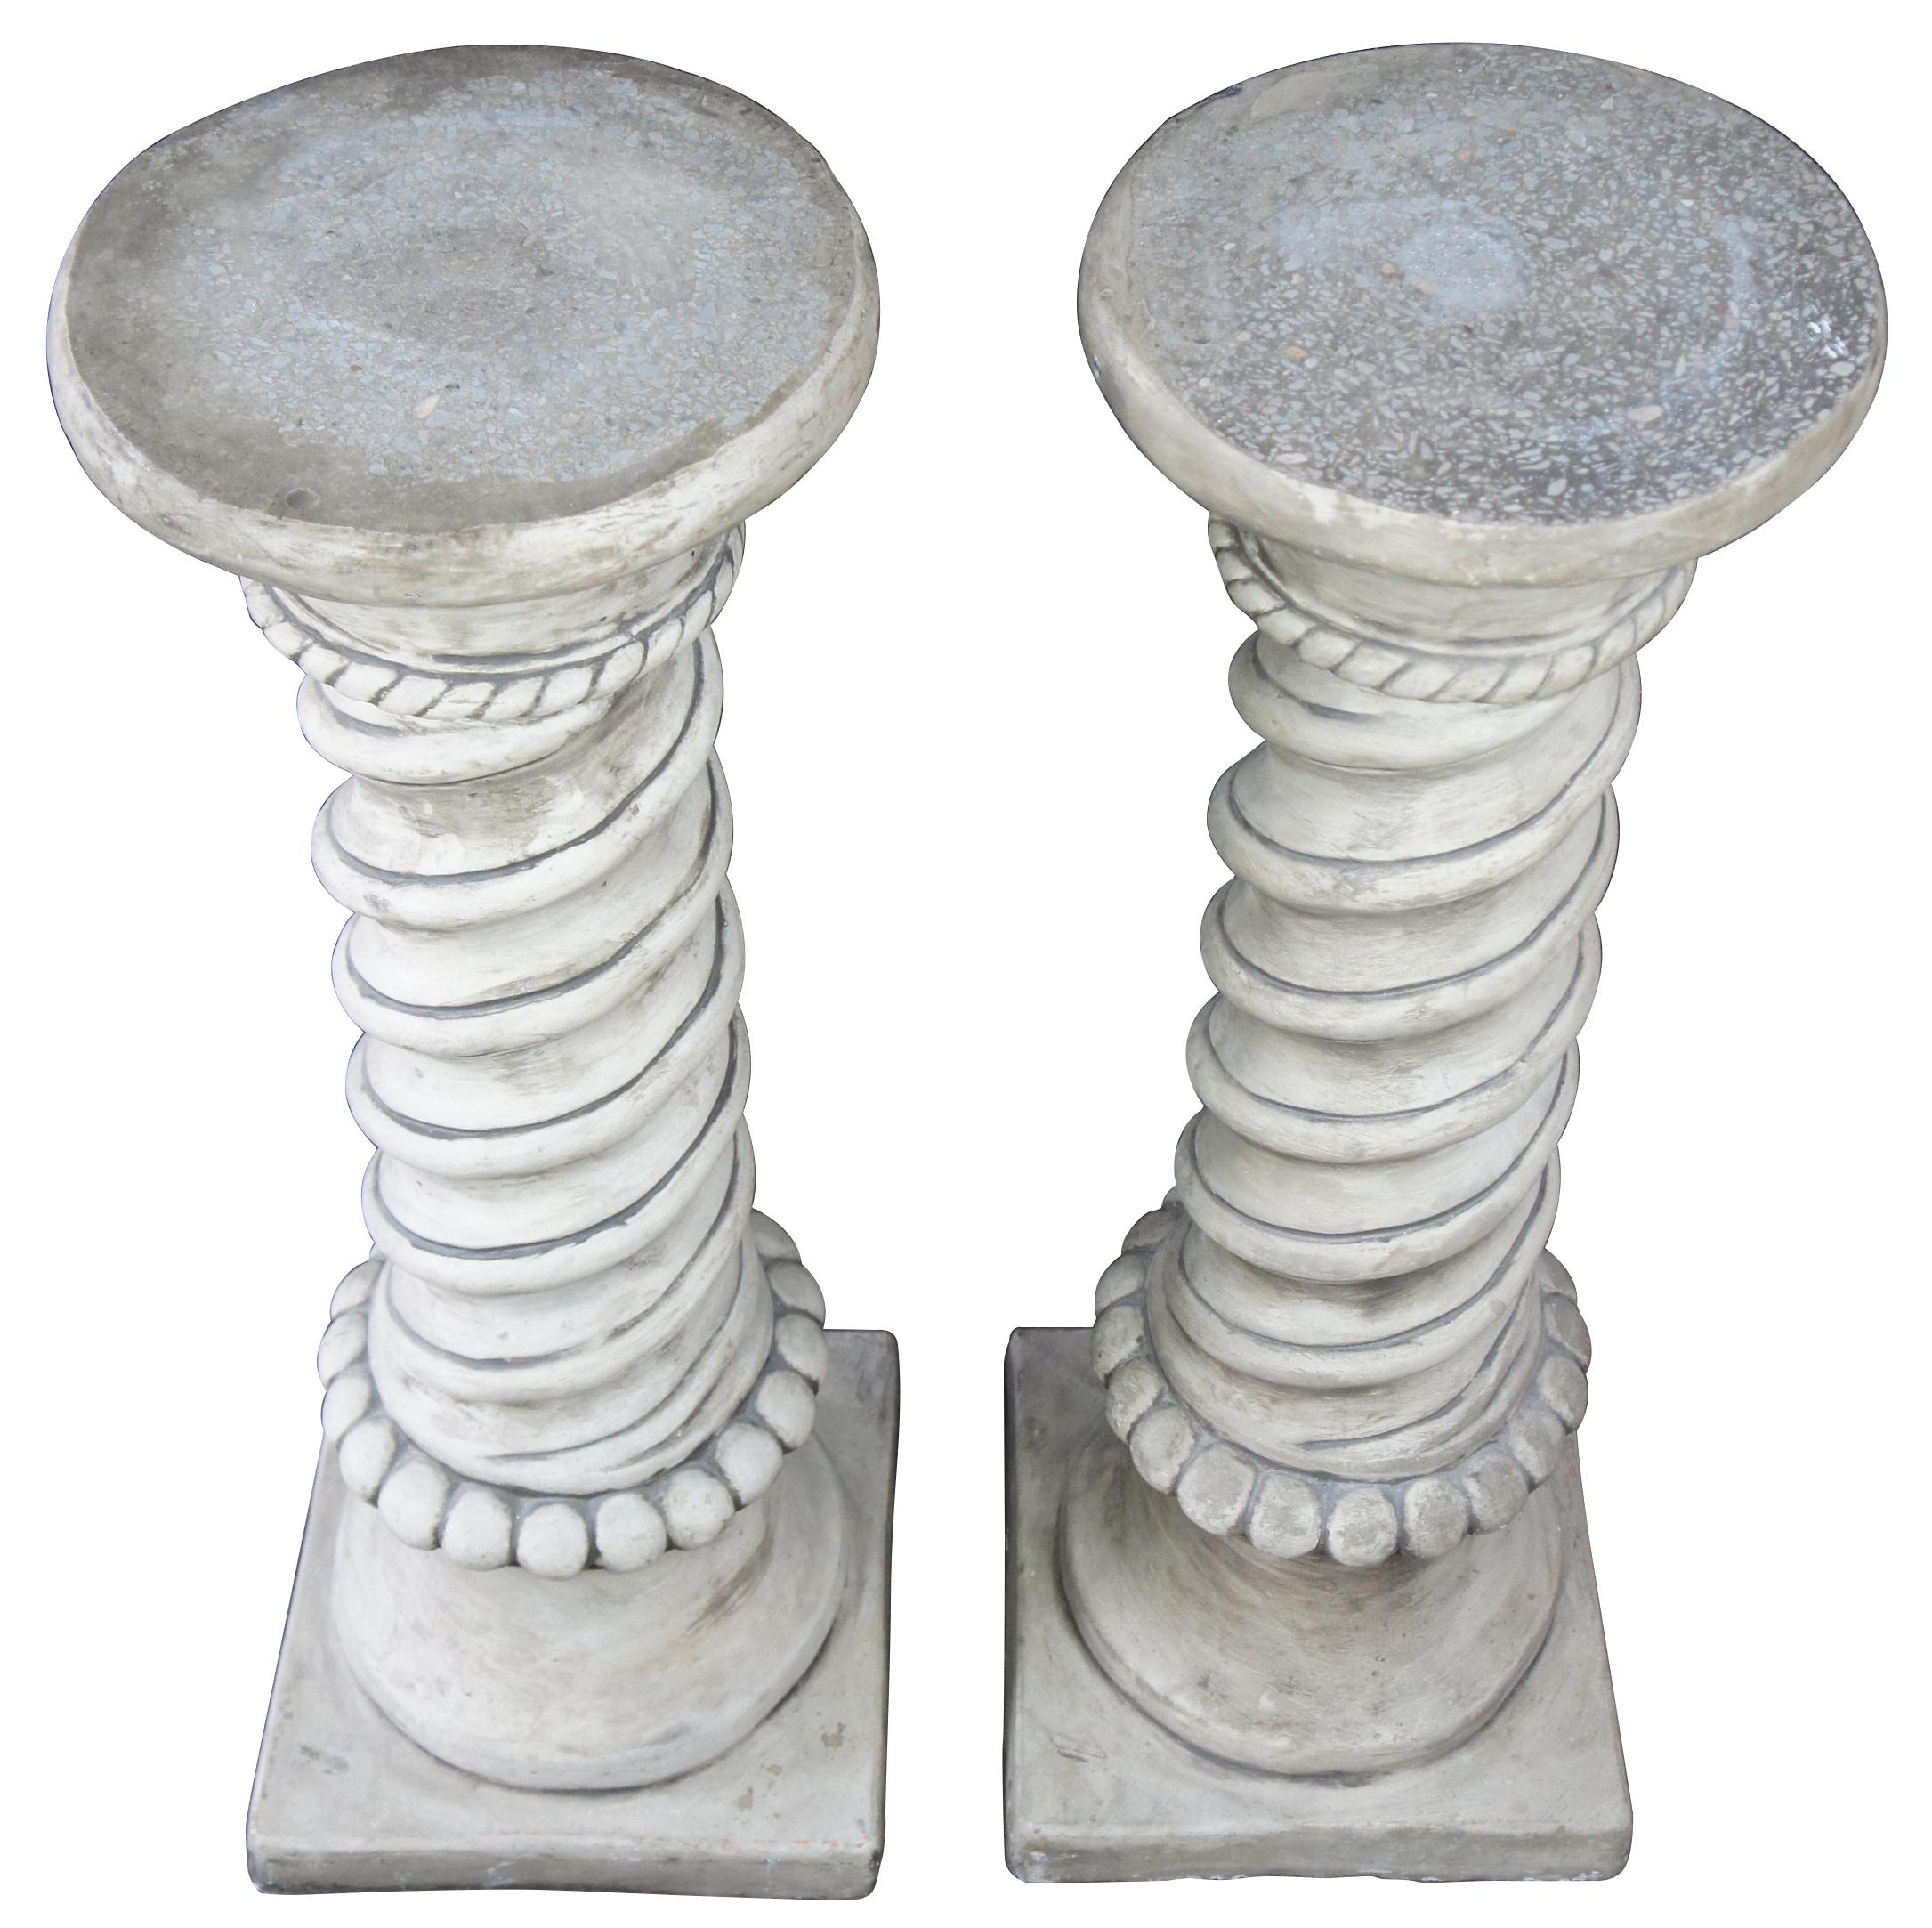 Late 20th century Victorian Revival barley twisted stone pedestals or plant stands. Each features a turned central column offest by a beaded and gadrooned design with a painted finish.
 
Top Diameter - 11.5